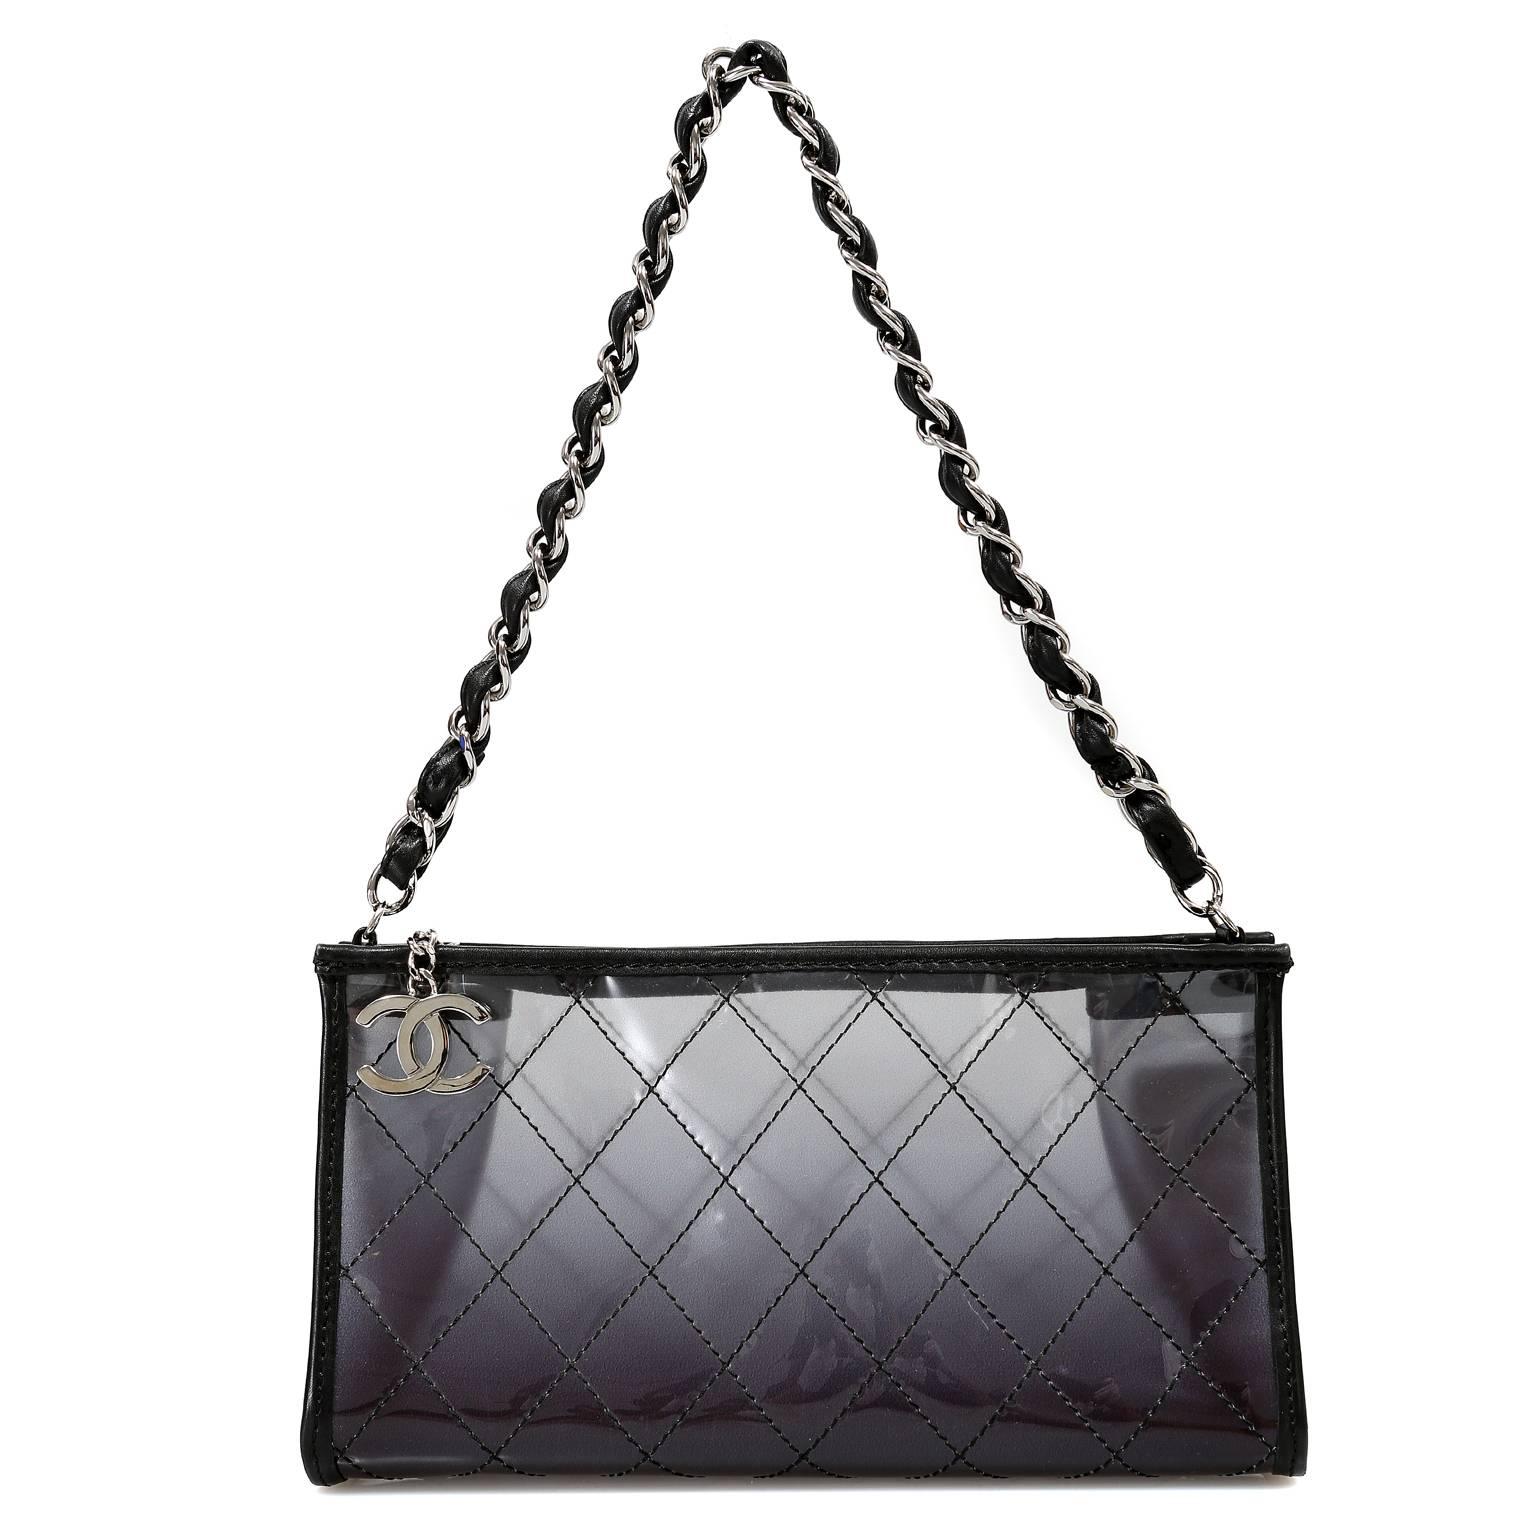 Chanel Smoked Lucite Bag 4